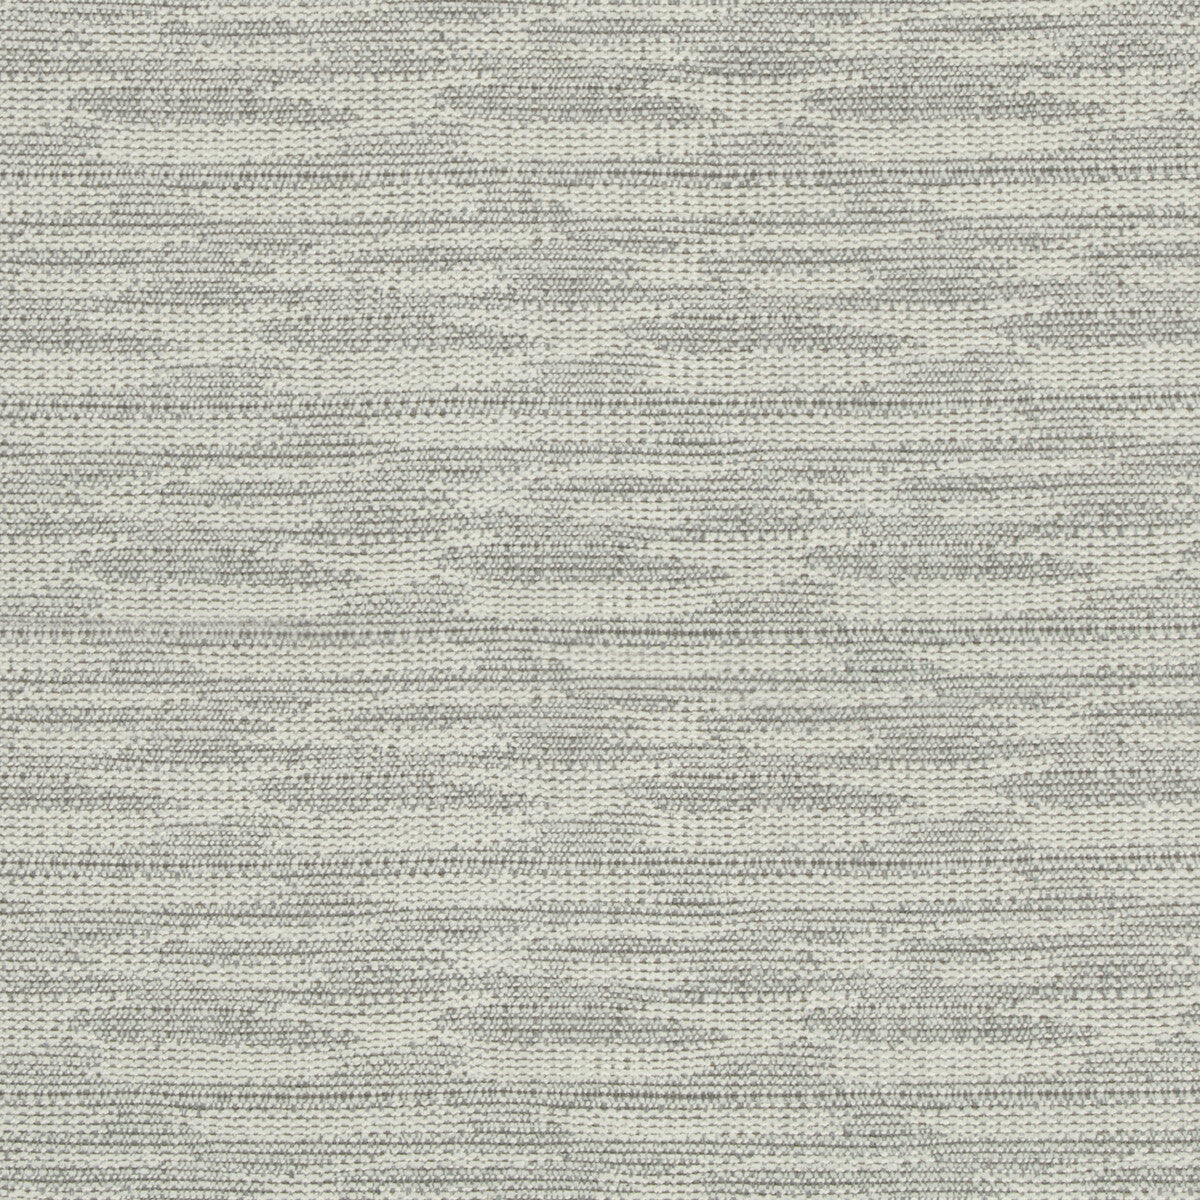 Playa fabric in silver smoke color - pattern GWF-3744.111.0 - by Lee Jofa Modern in the Kw Terra Firma II Indoor Outdoor collection